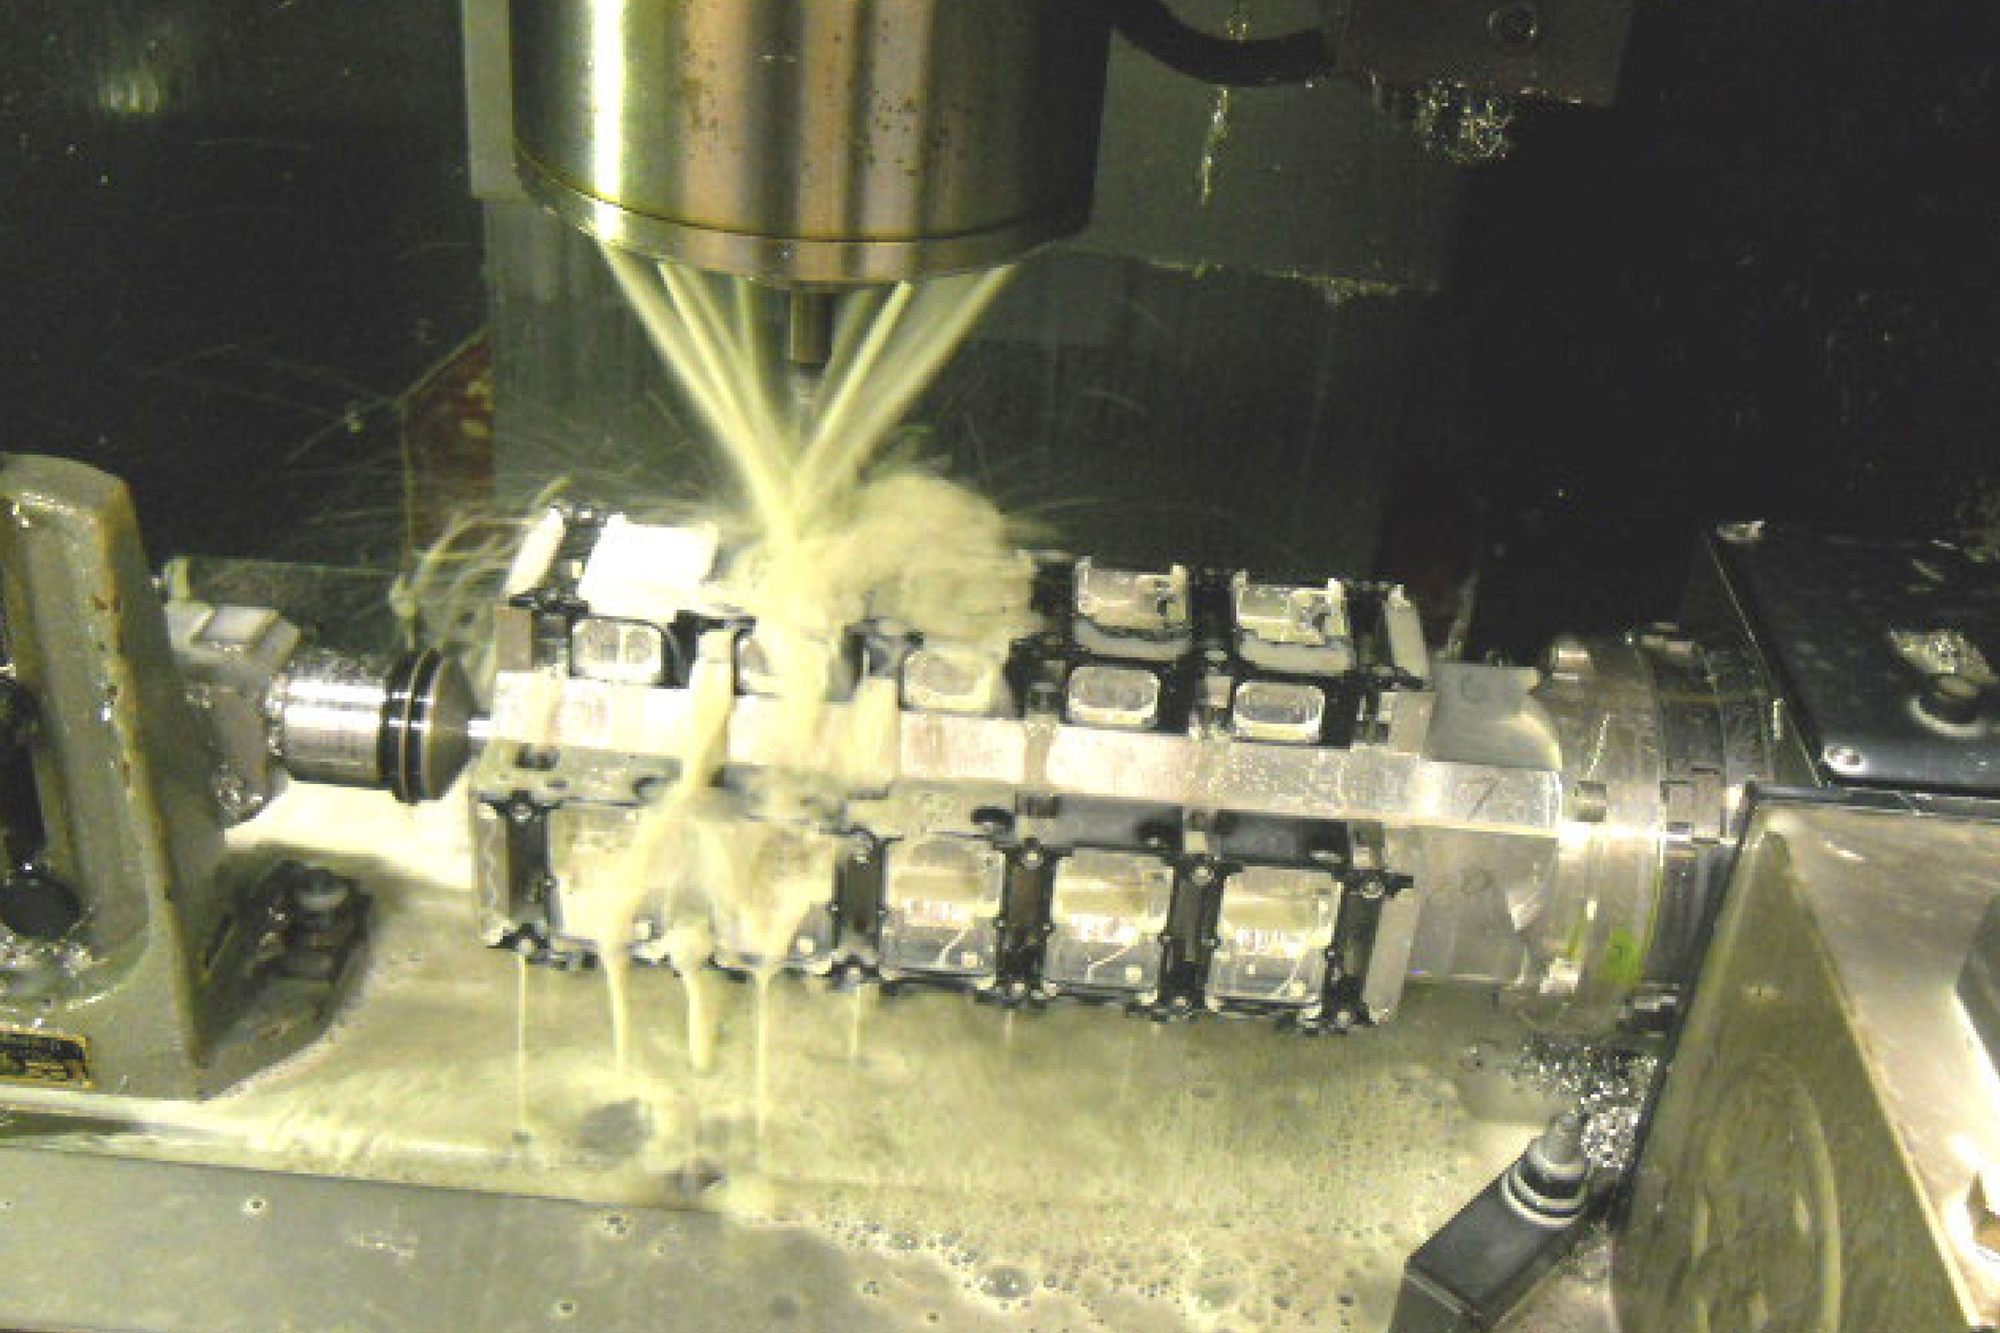 CNC Equipment and Manufacturing